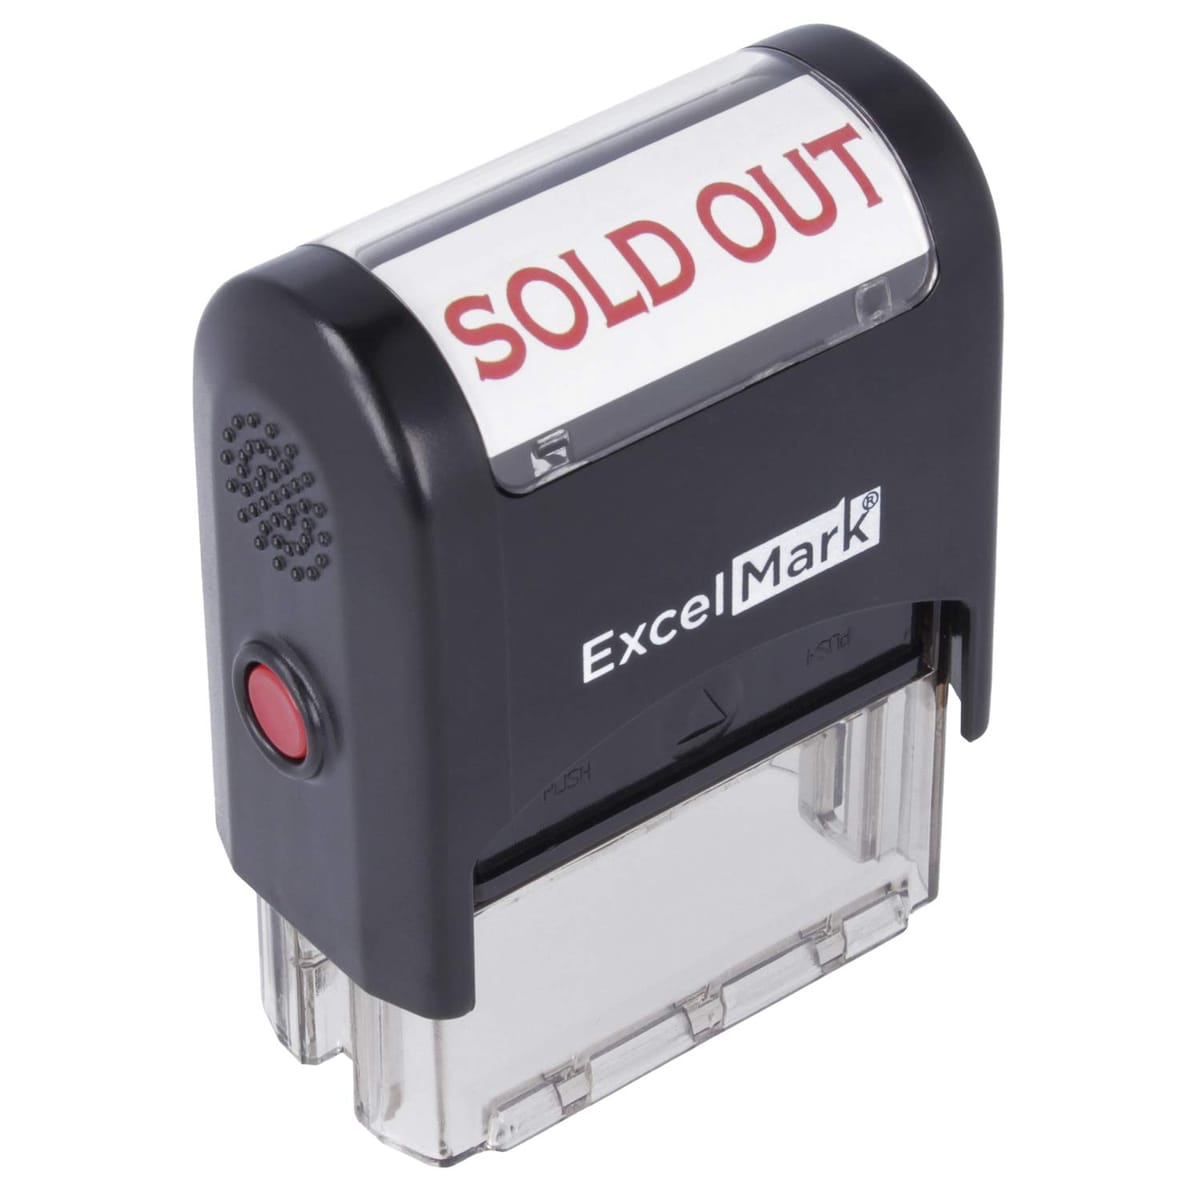 Sold Out Self Inkingラバースタンプ – レッドインク( ExcelMark a1539 )